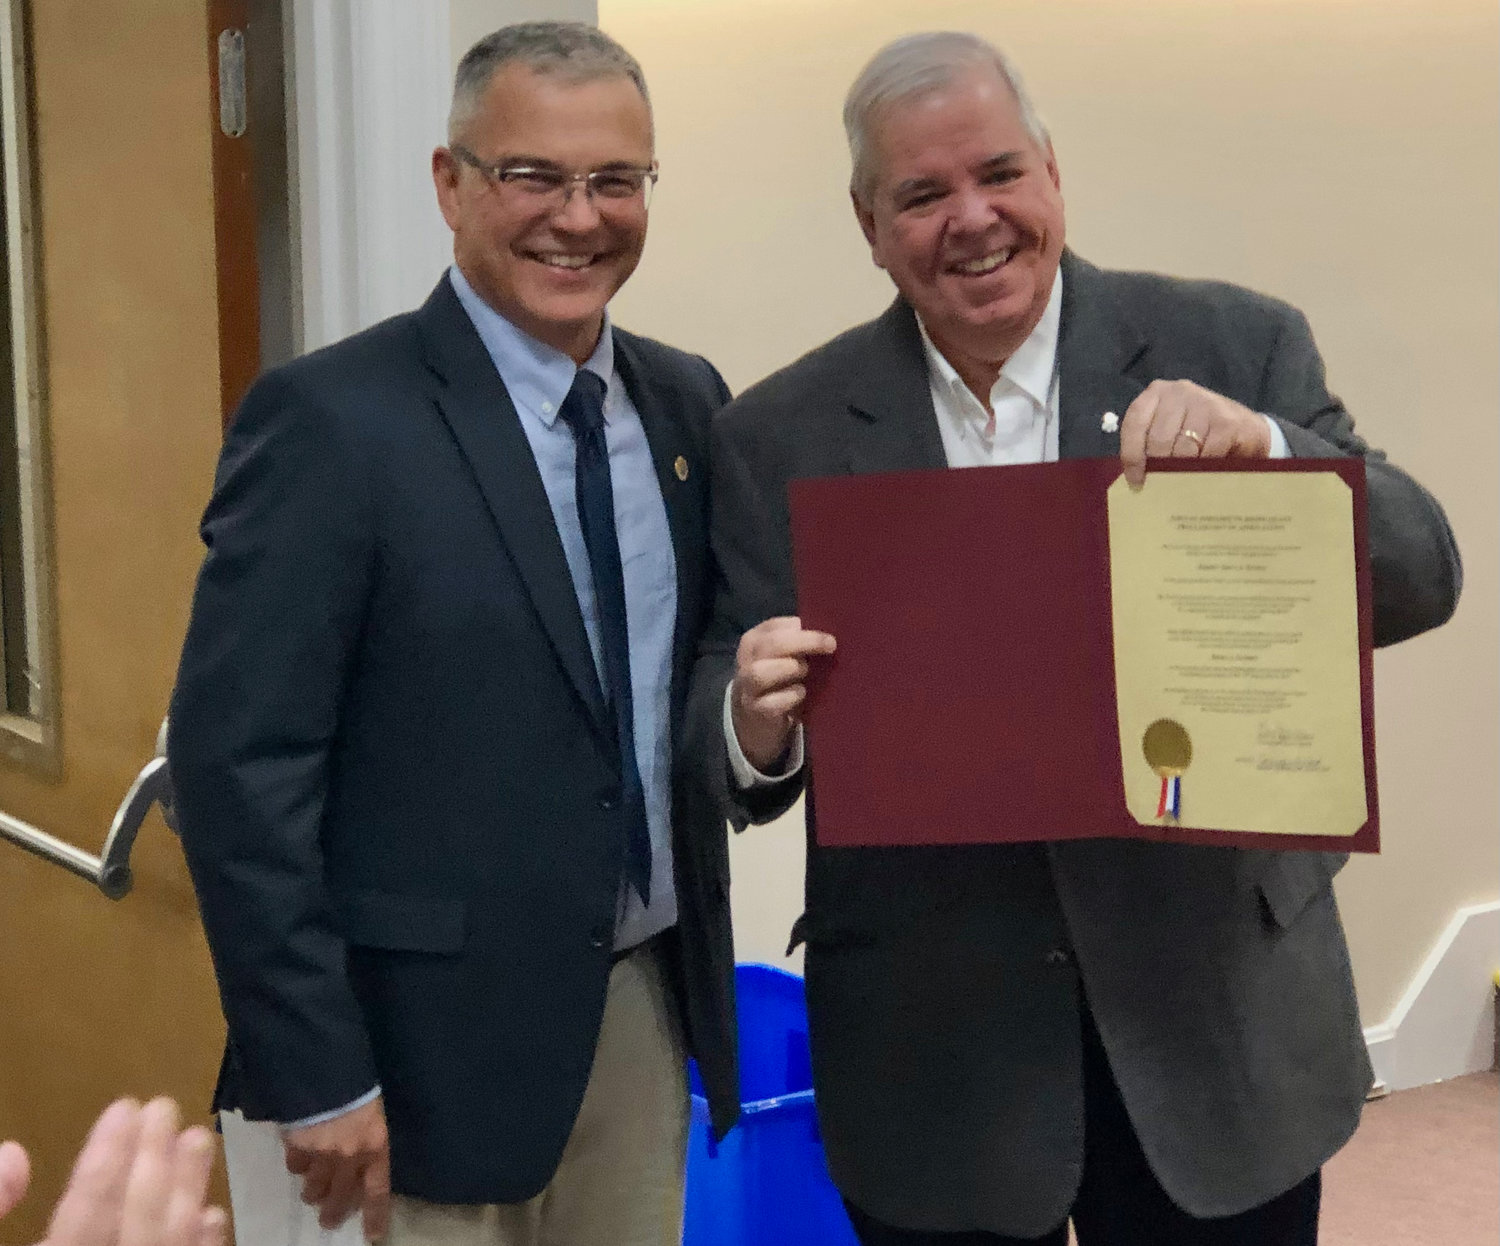 Former R.I. Sen. James Seveney shows off the proclamation that Town Council President Kevin Aguiar (left) had just presented to him during a brief ceremony at Monday night’s meeting. Seveney is also a former council president.